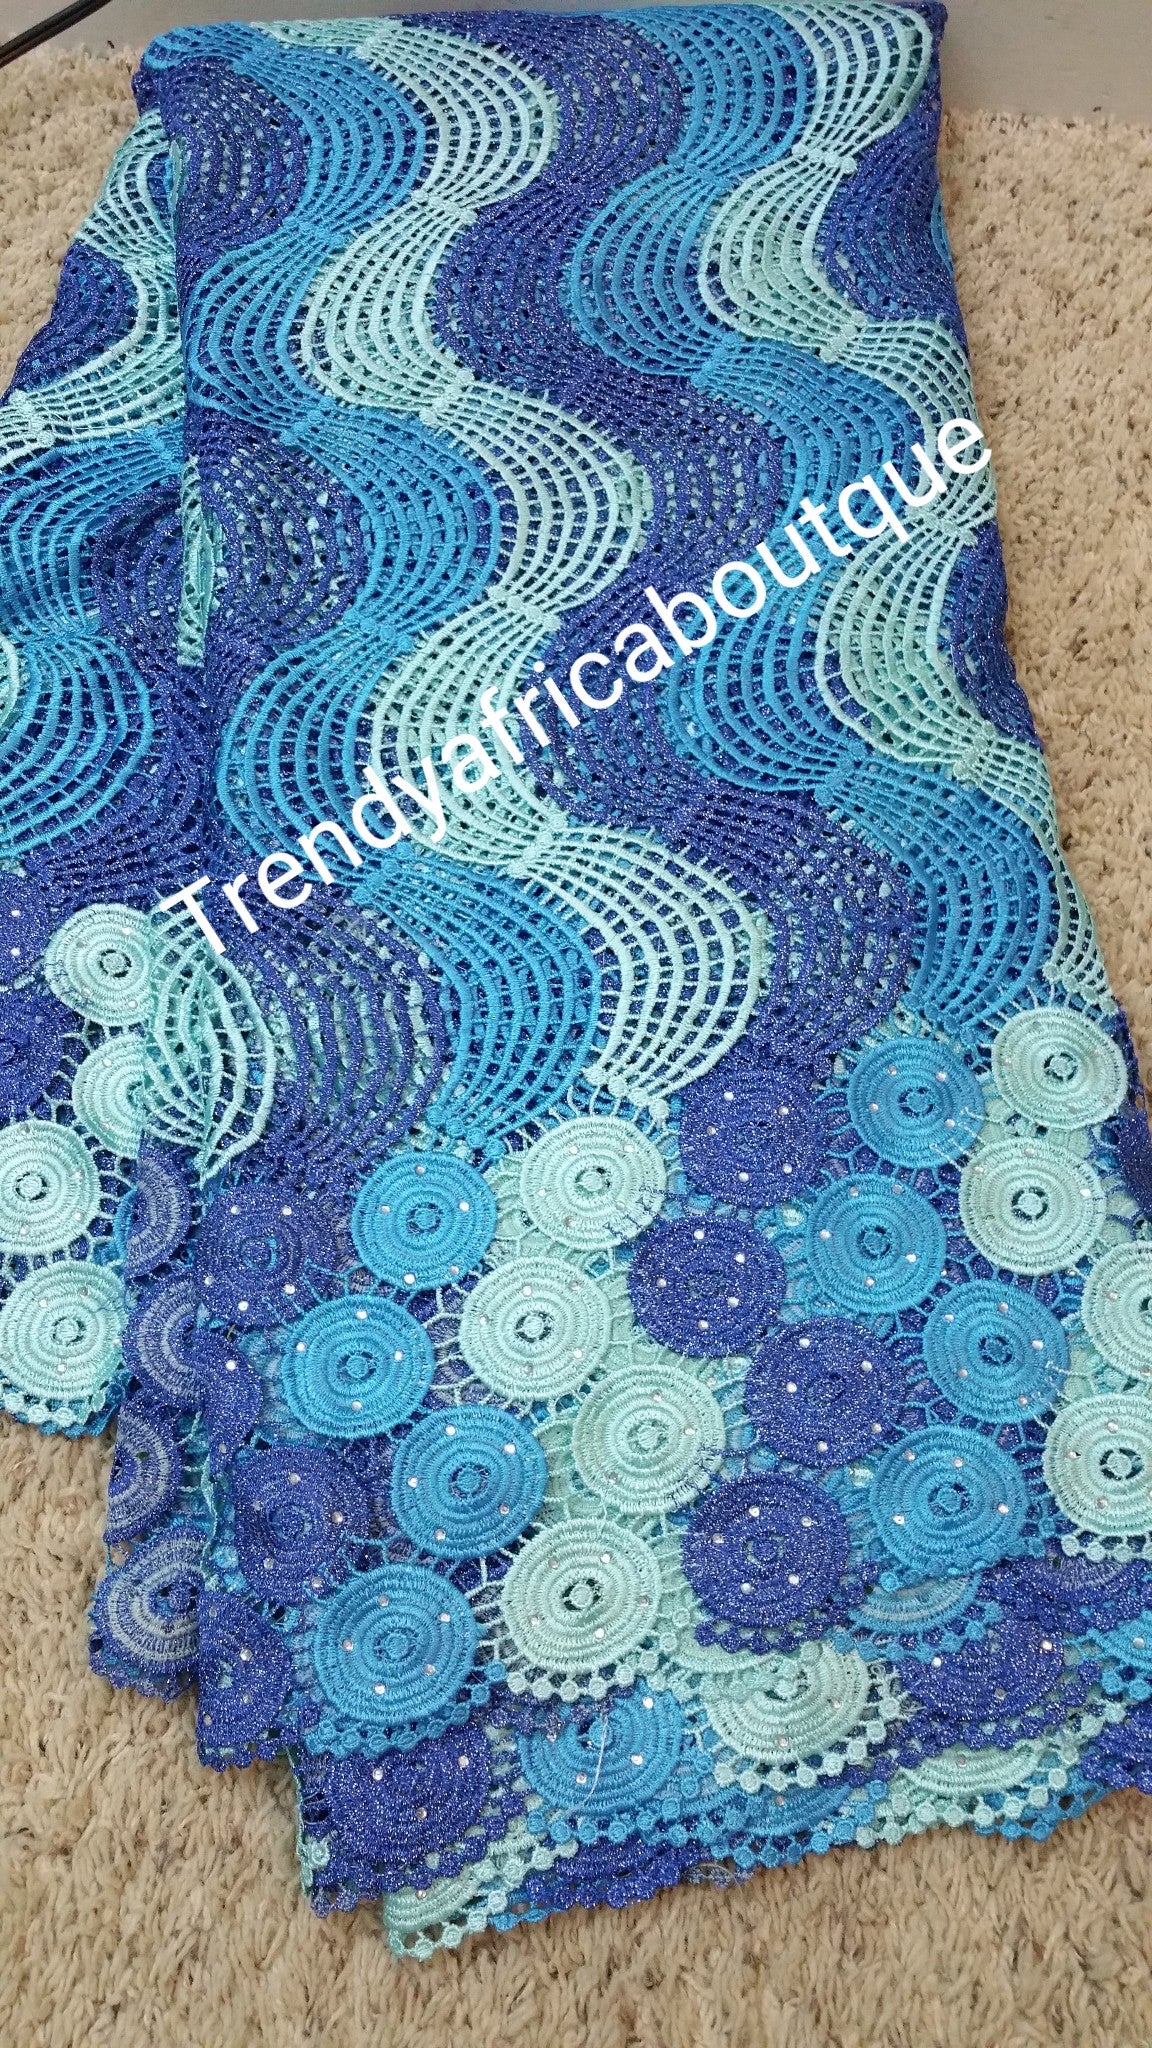 Quality Cord/guipure swiss lace Fabric for African/Nigerian Party dresses. Sold by 5yds and price is for 5 yards. Soft, quality? * elegant design